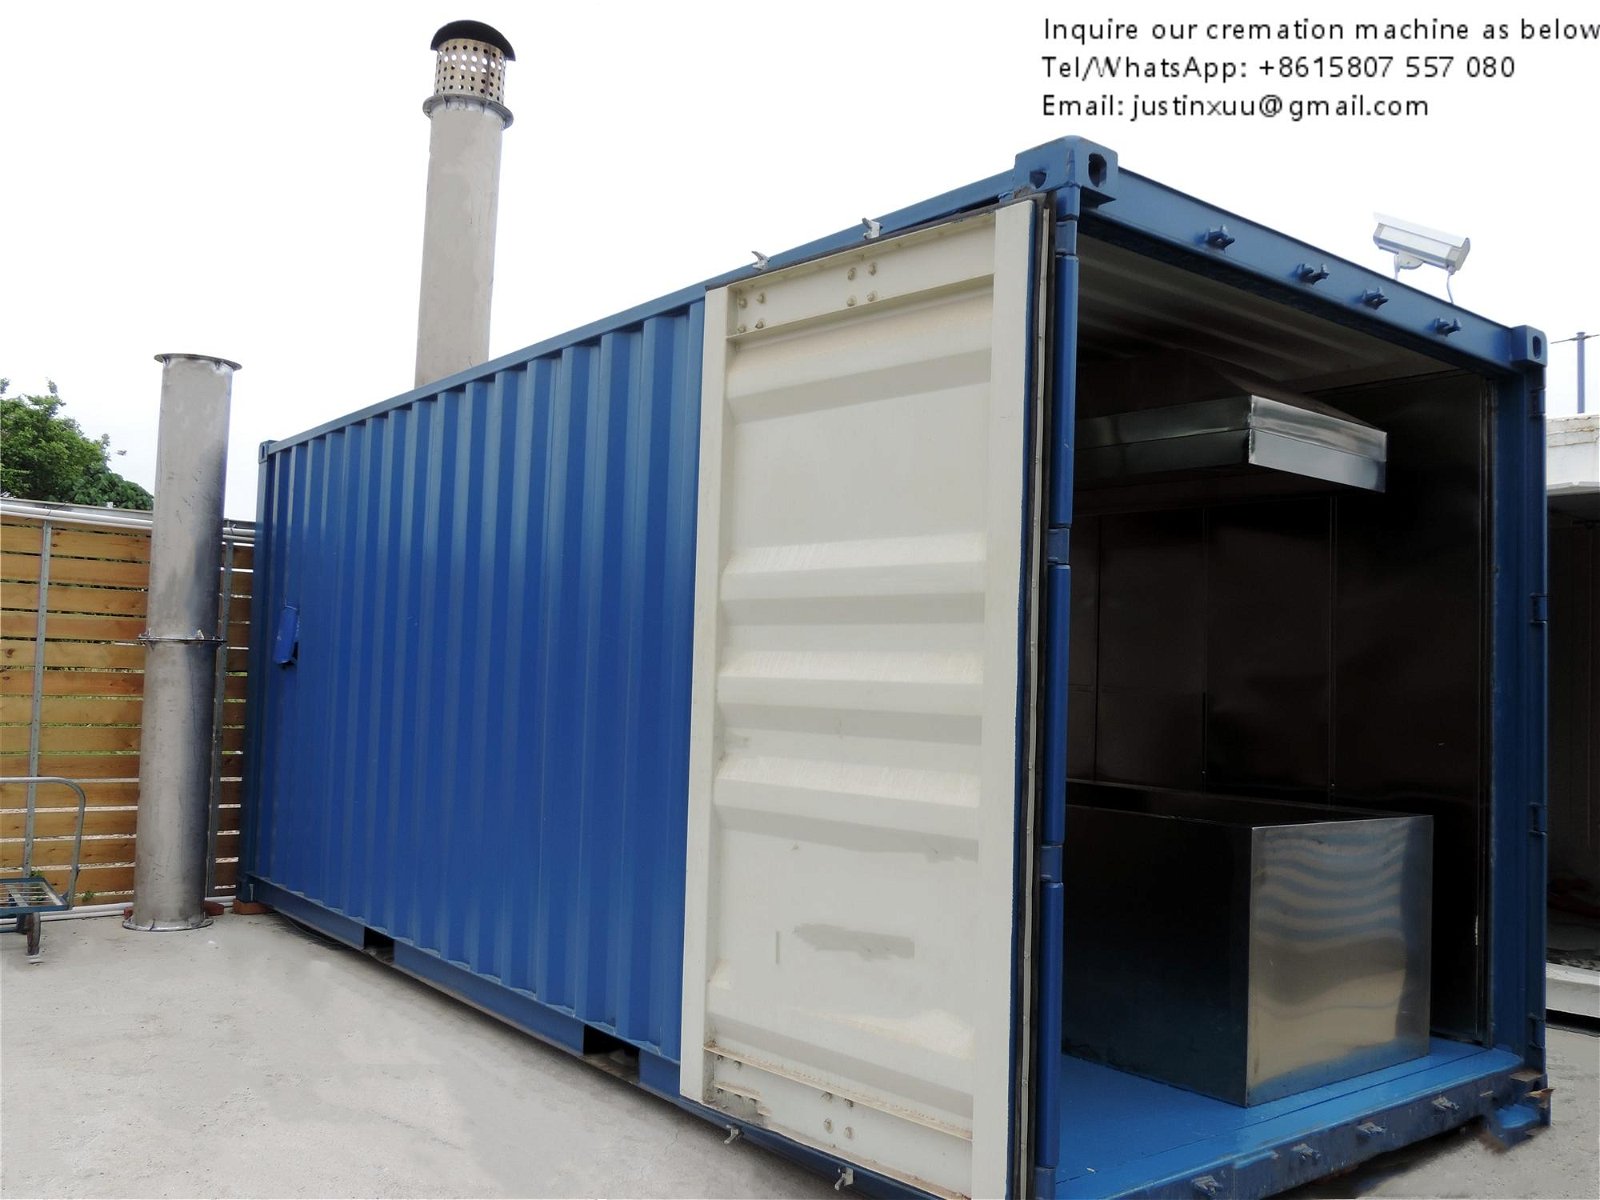  portable furnaces for human death CE standard designed for Russia market 